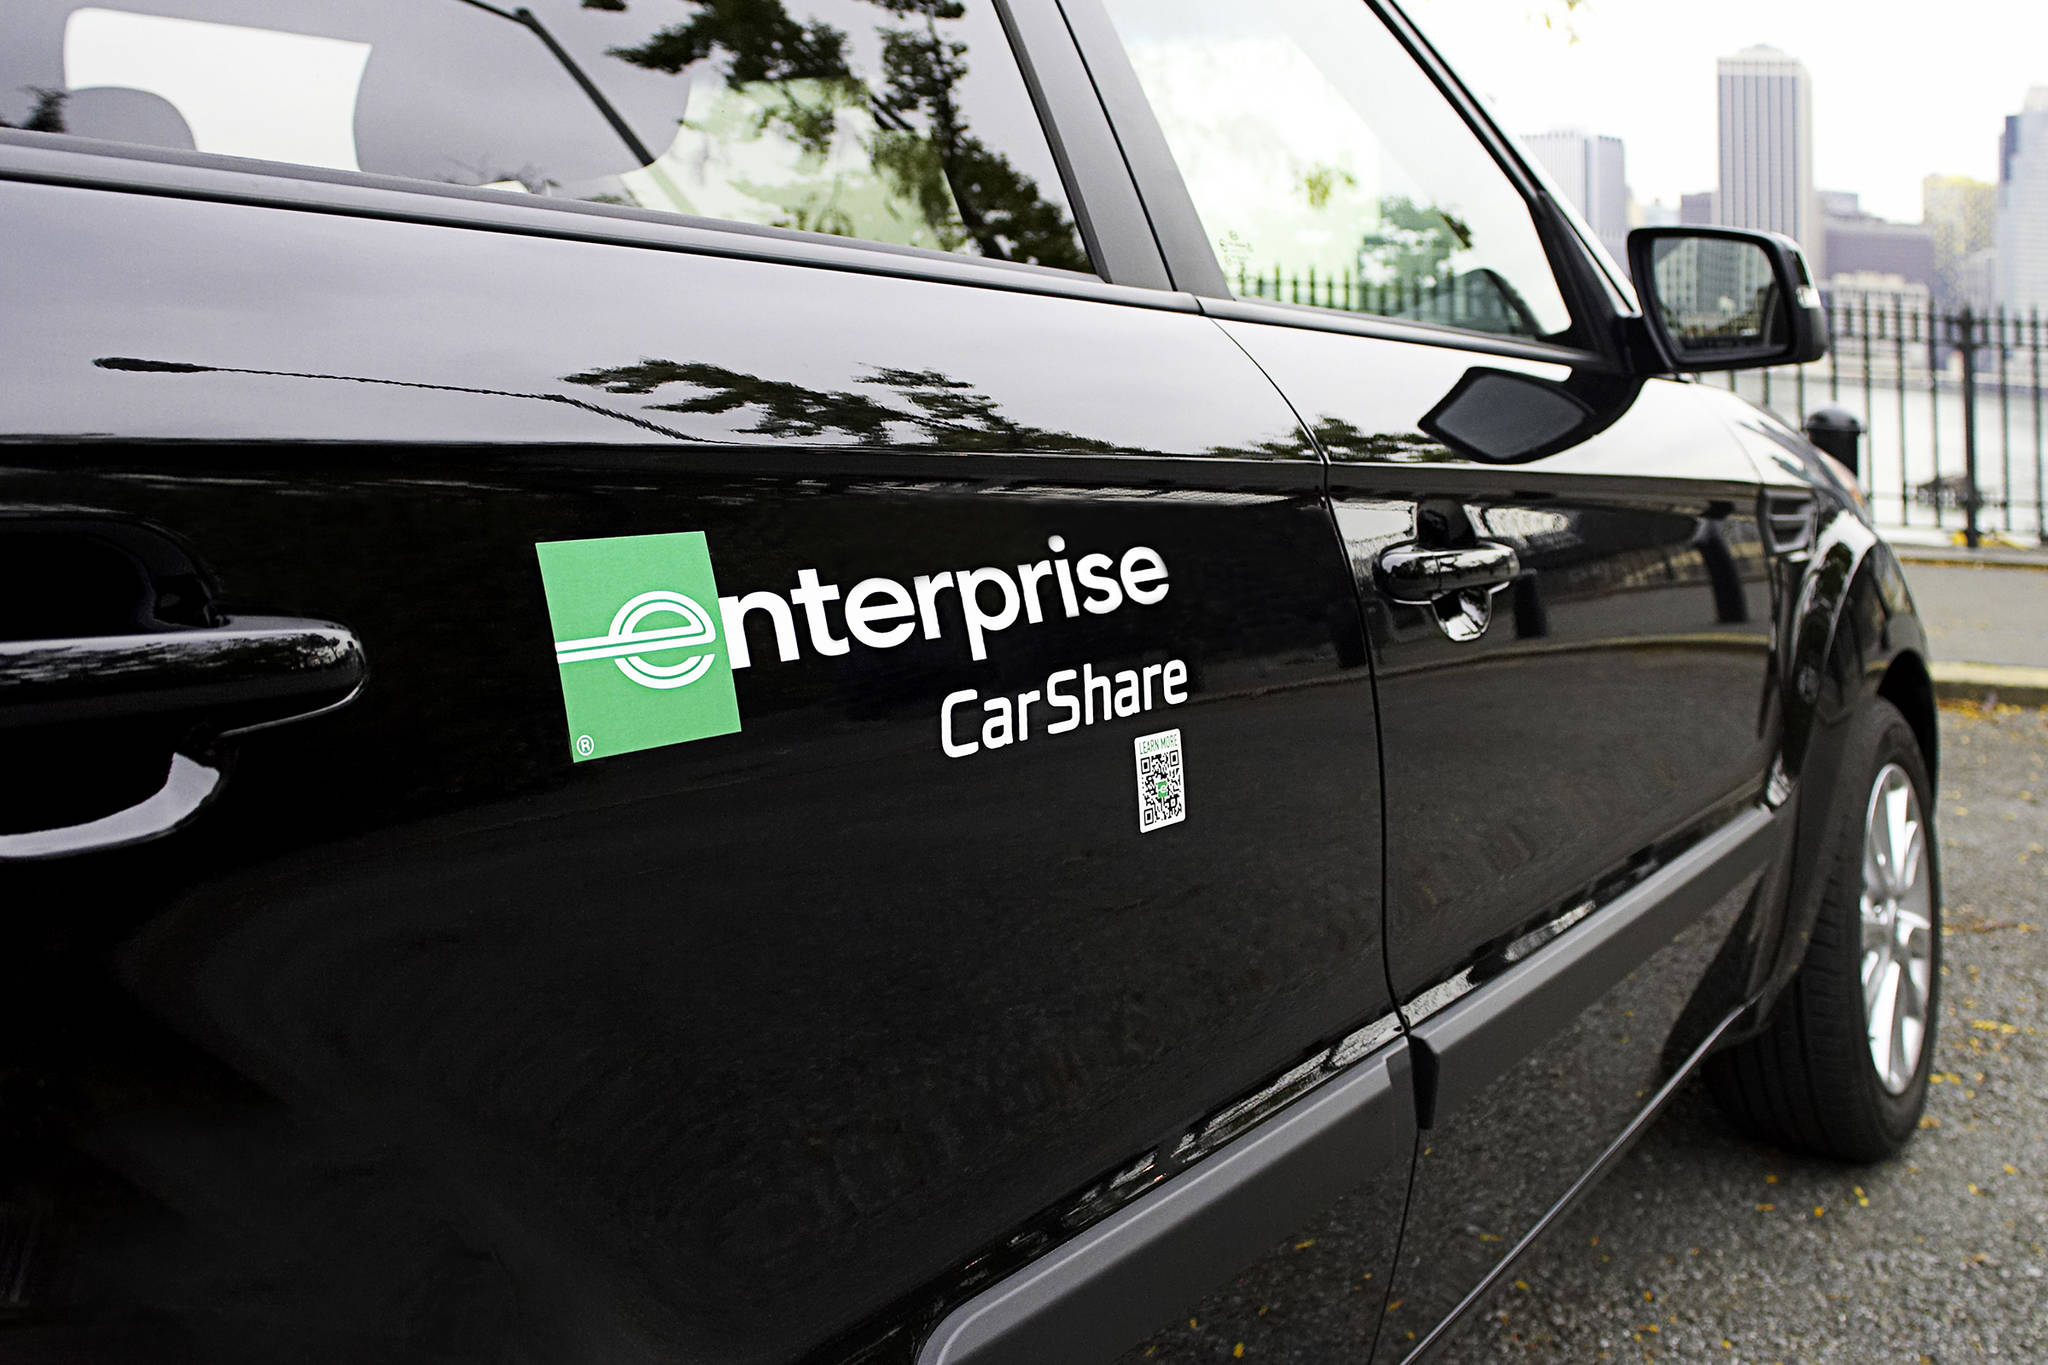 Opinion: Peer-to-peer car rental companies need to face, not hide, facts